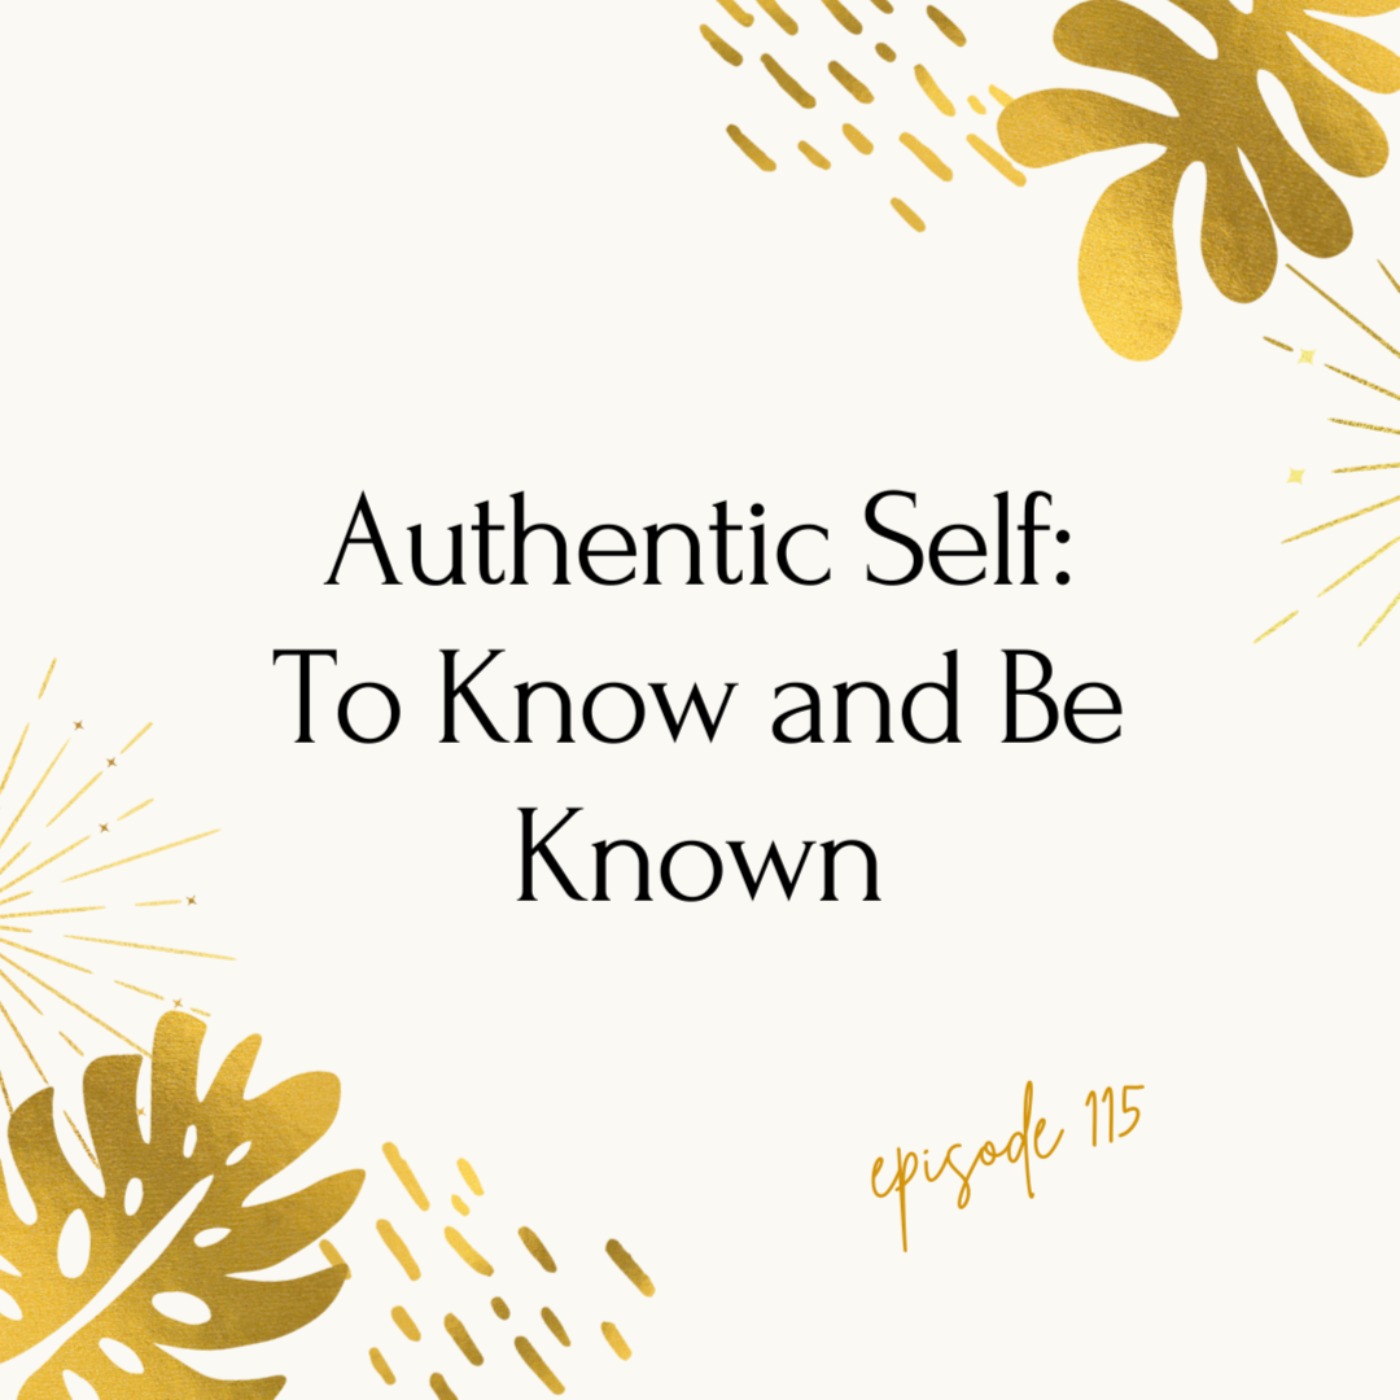 Revealing the Authentic Self